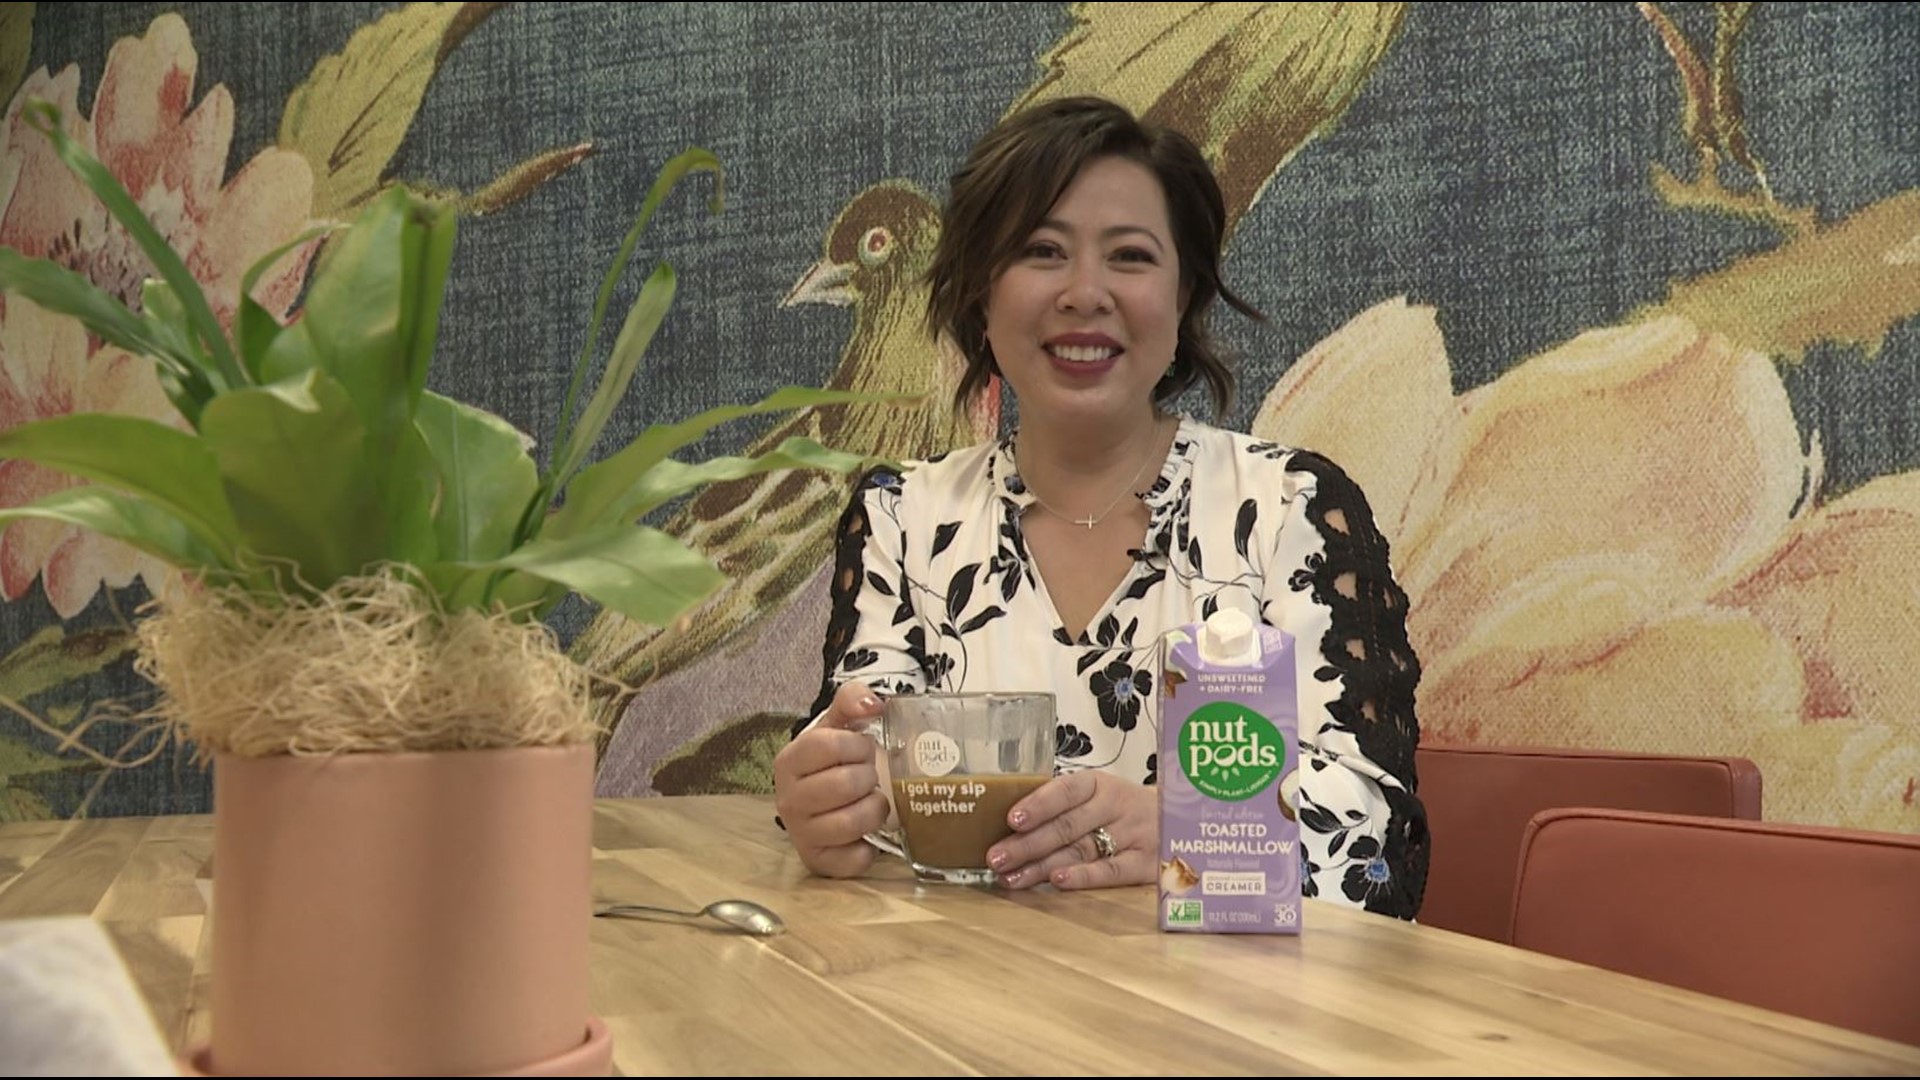 It's taken less than a decade for the founder of nutpods to taste success beyond her wildest dreams. #k5evening